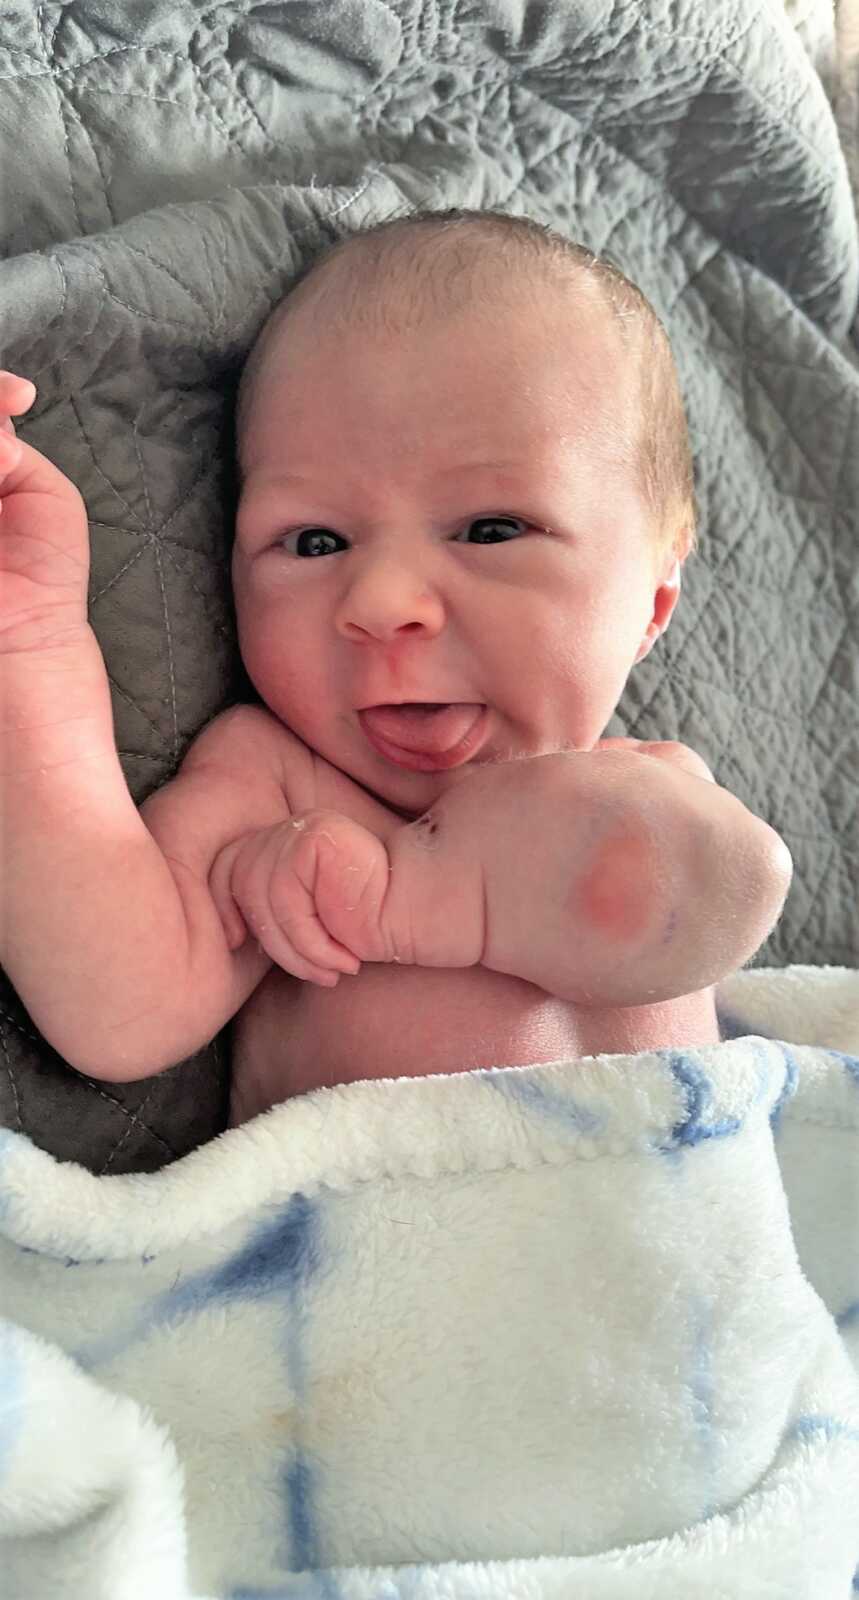 Newborn baby with inflamed arm due to cancer